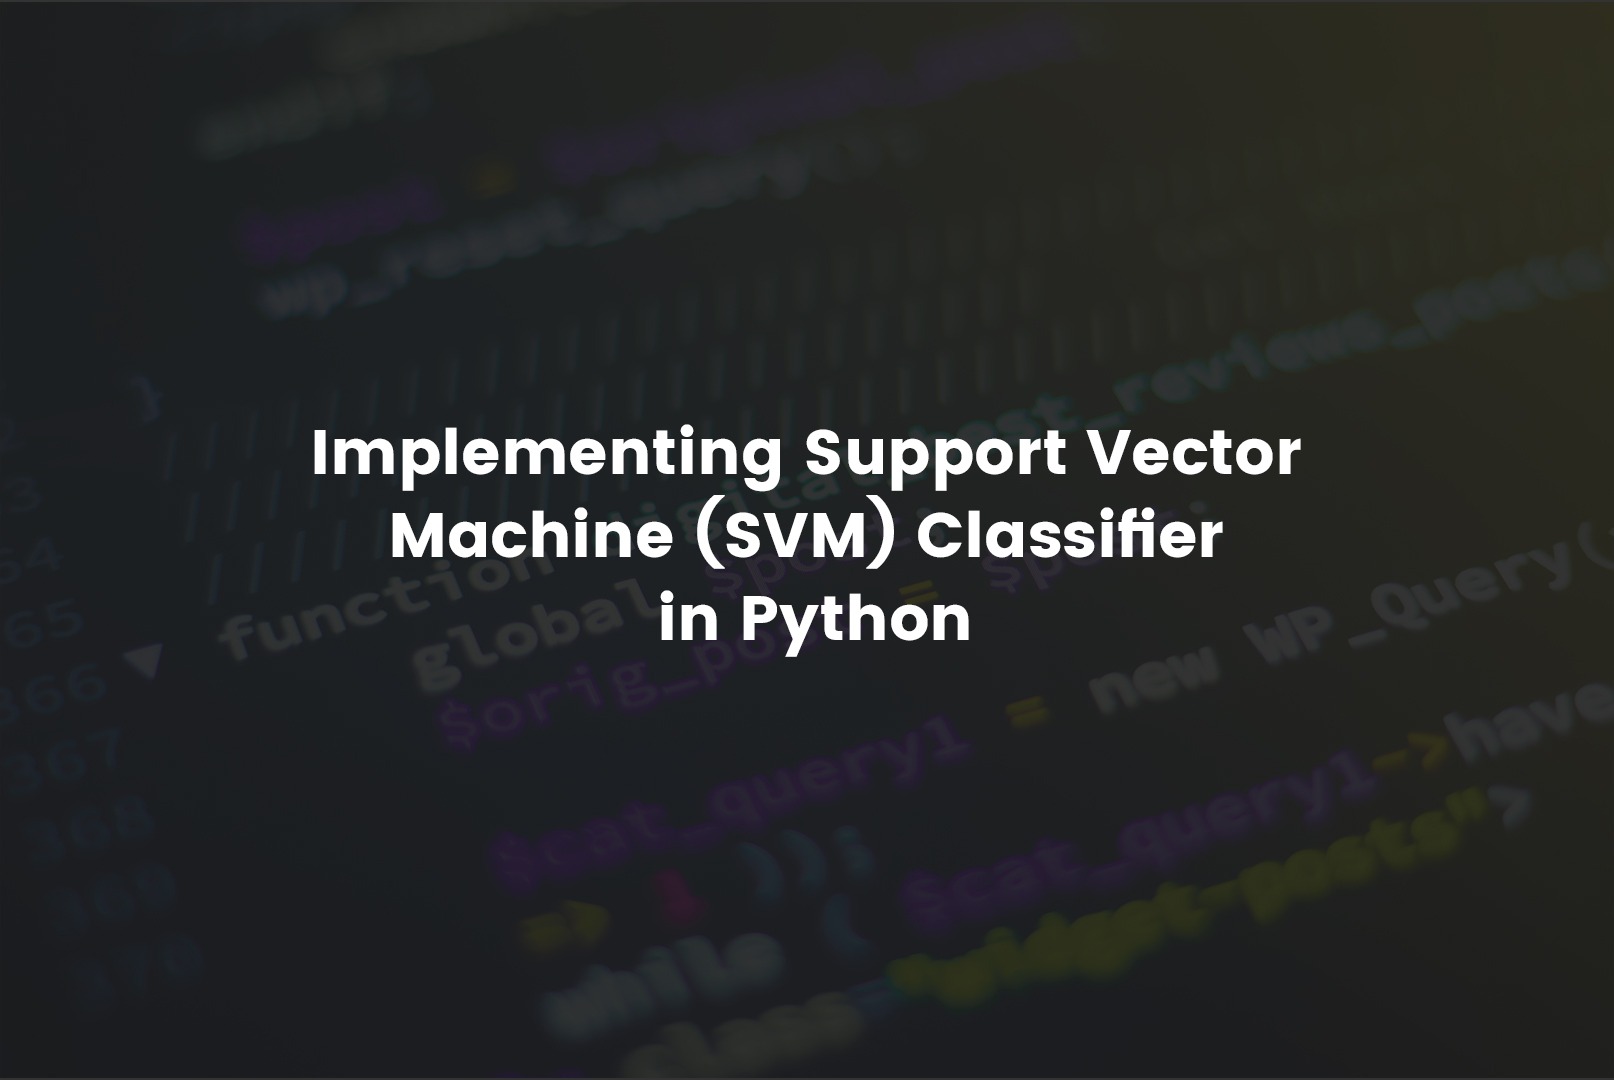 Implementing Support Vector Machine (SVM) Classifier in python